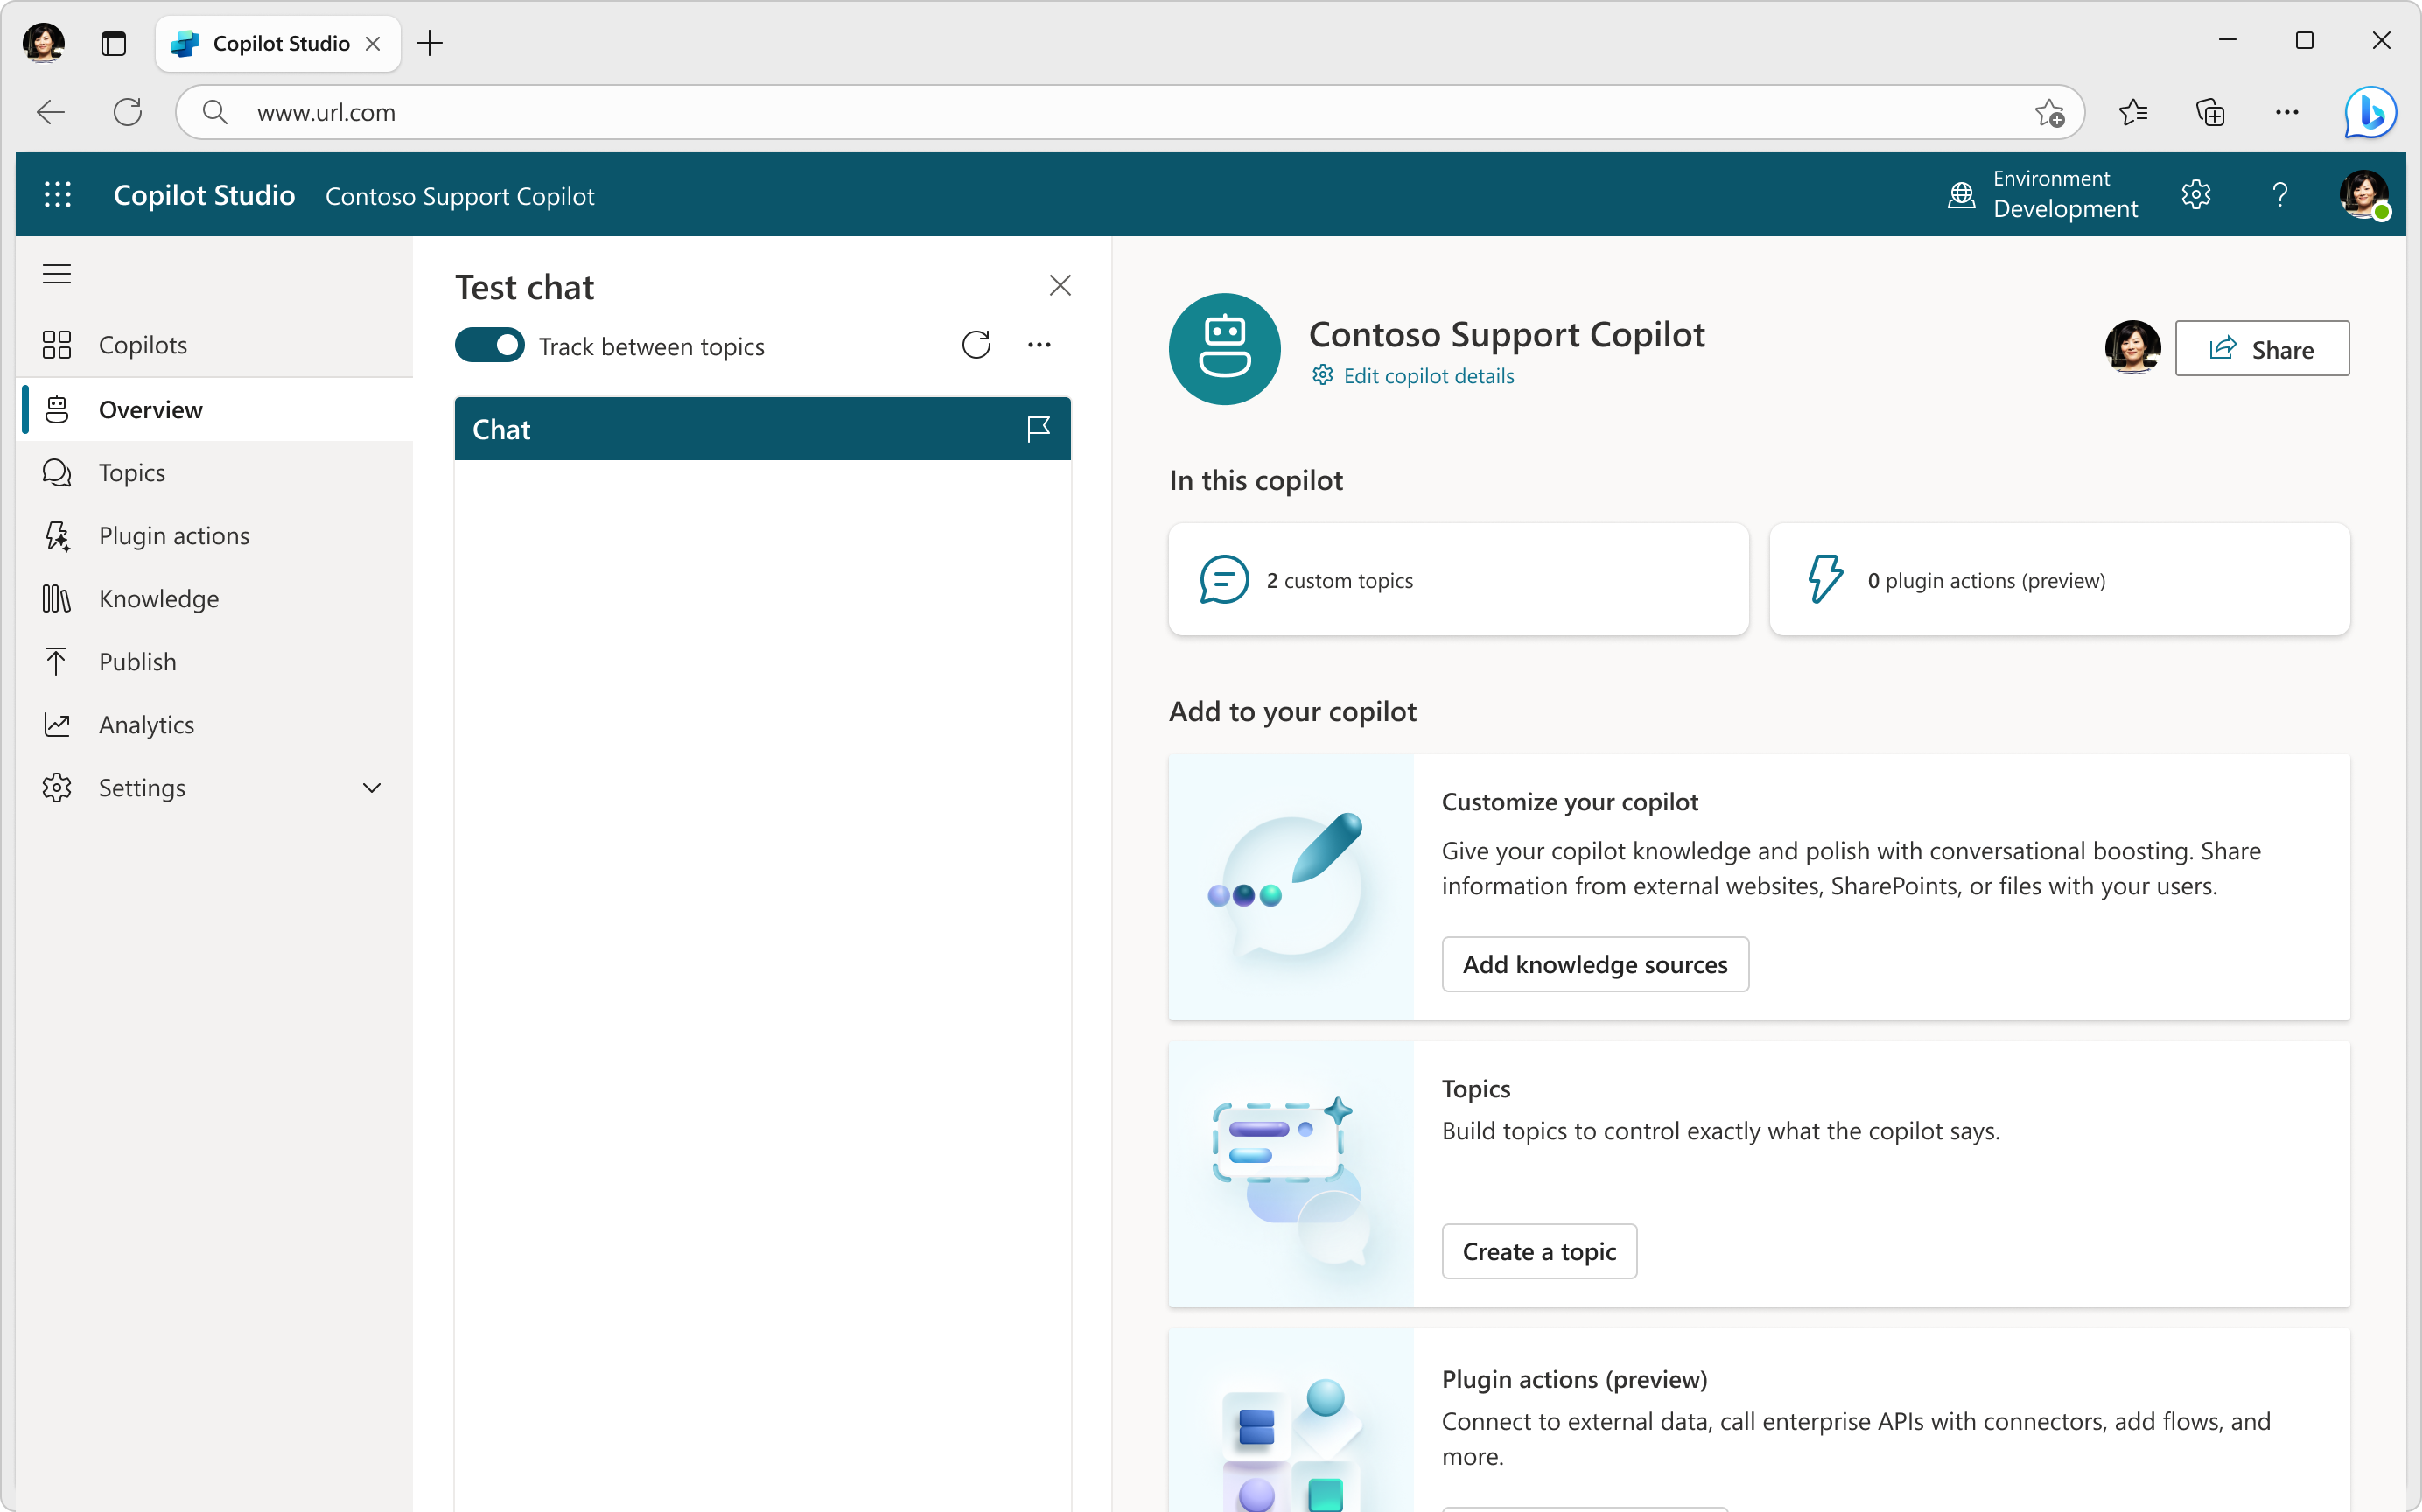 A view of the Copilot Studio Overview page showcasing the configuration and test chat capabilities of a Contoso Support Copilot